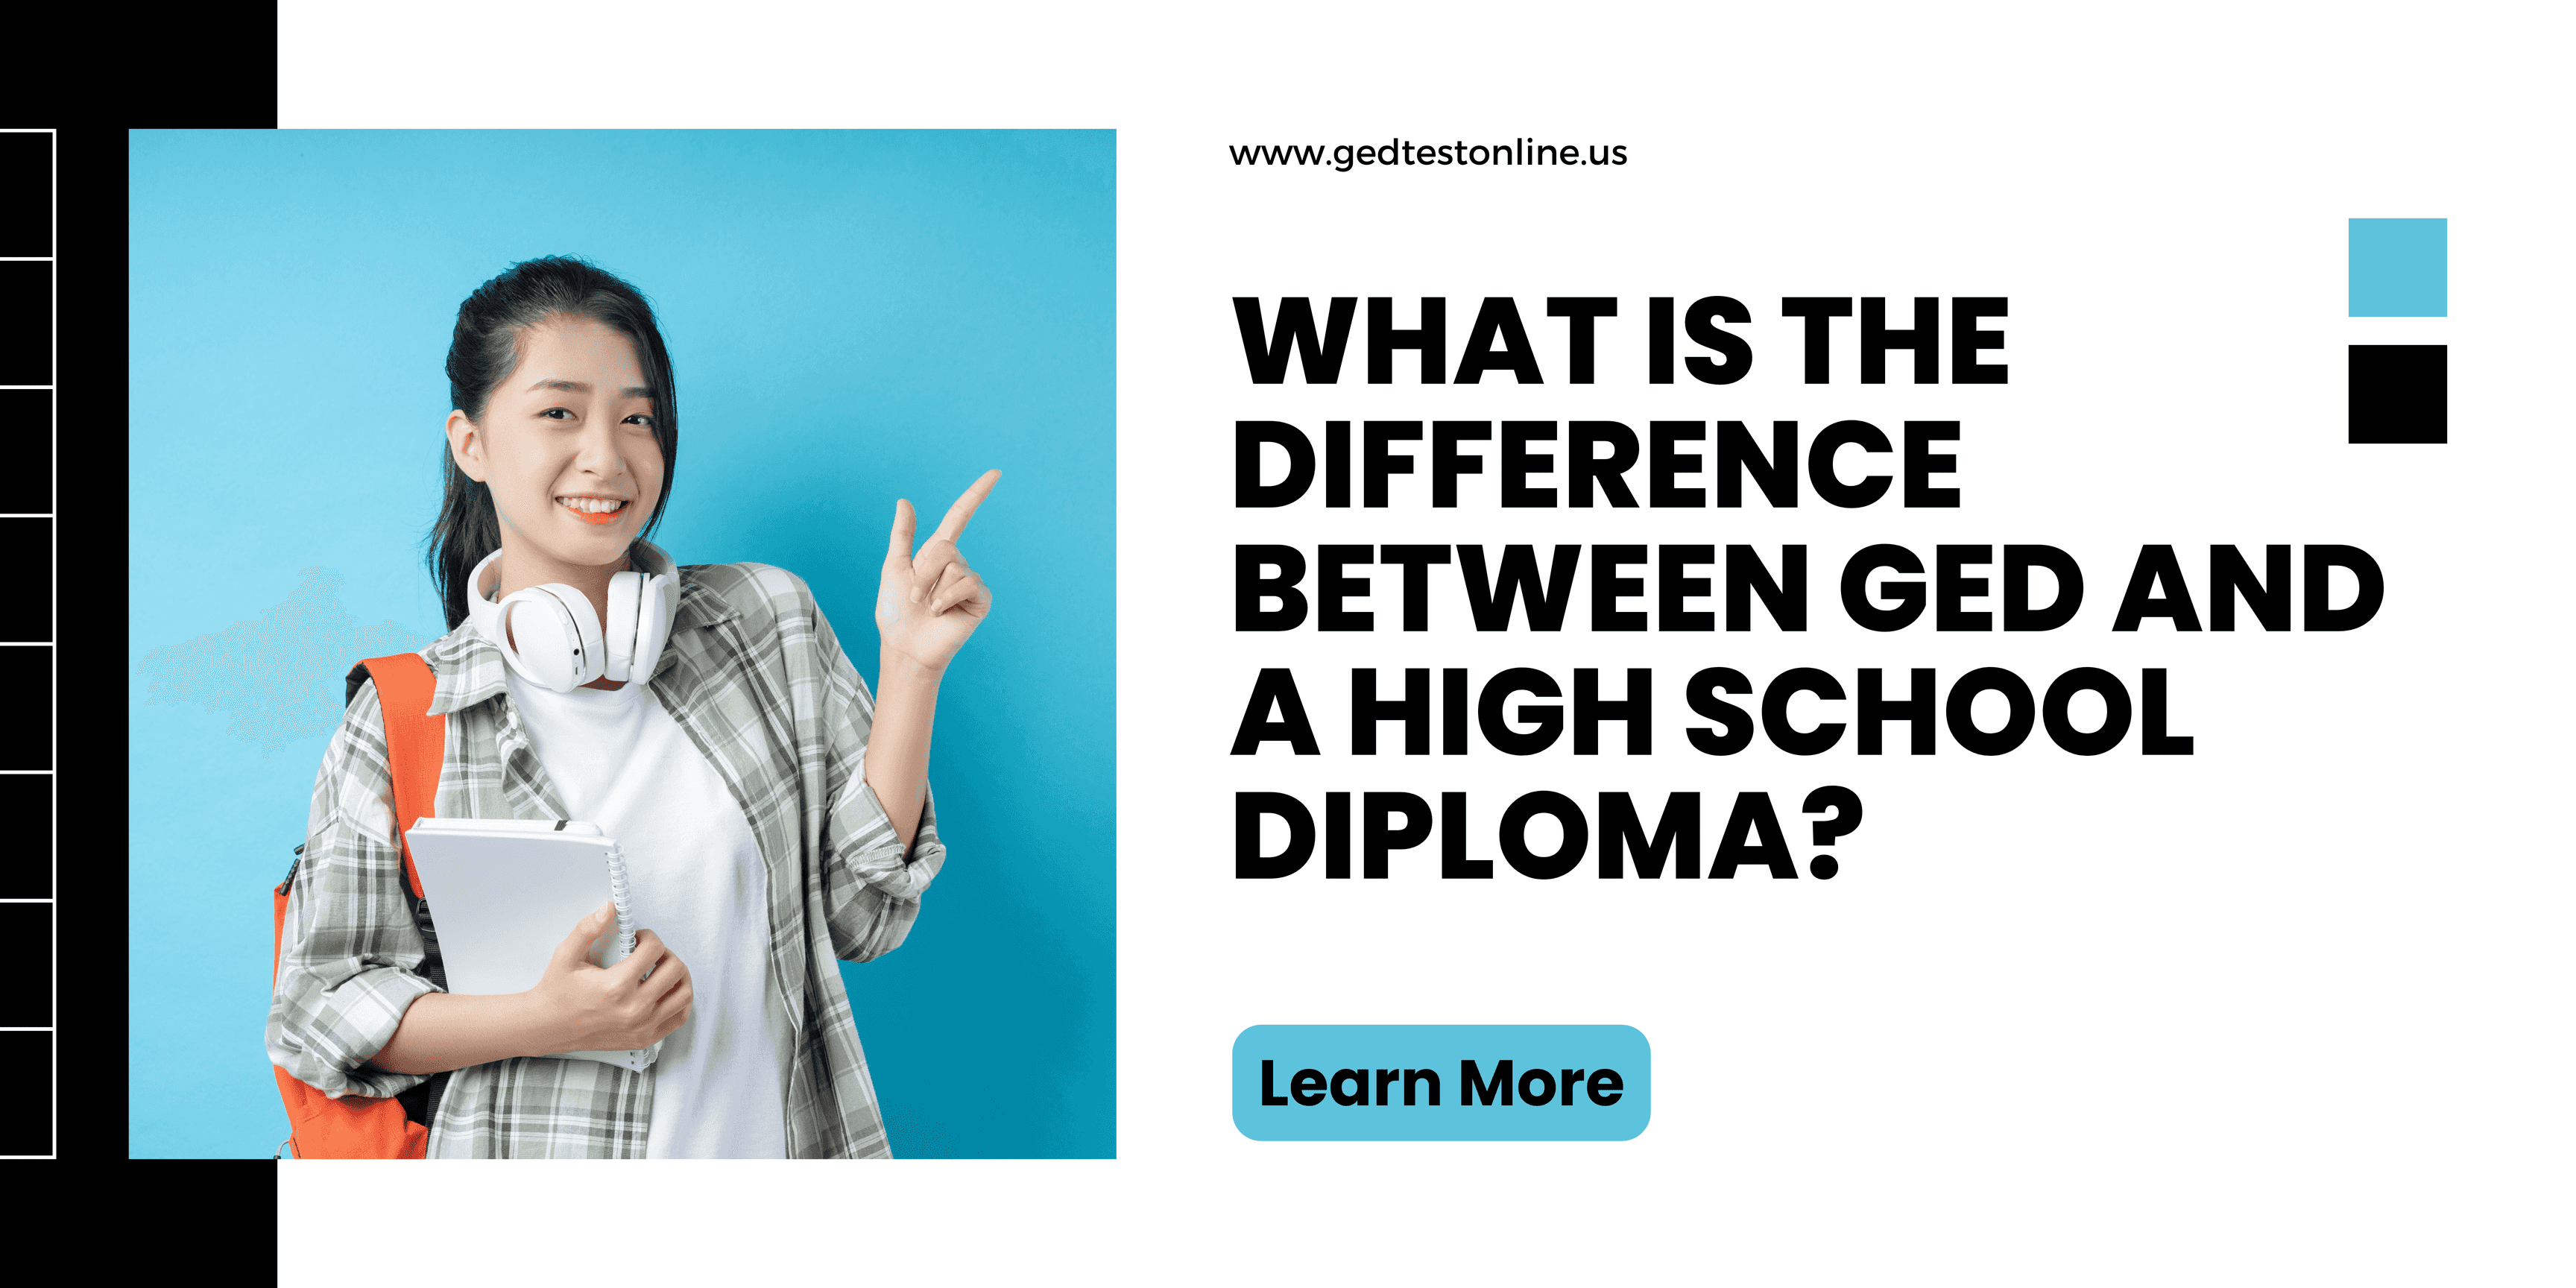 Ged Vs High School Diploma Understand The Differences Ged Test Online